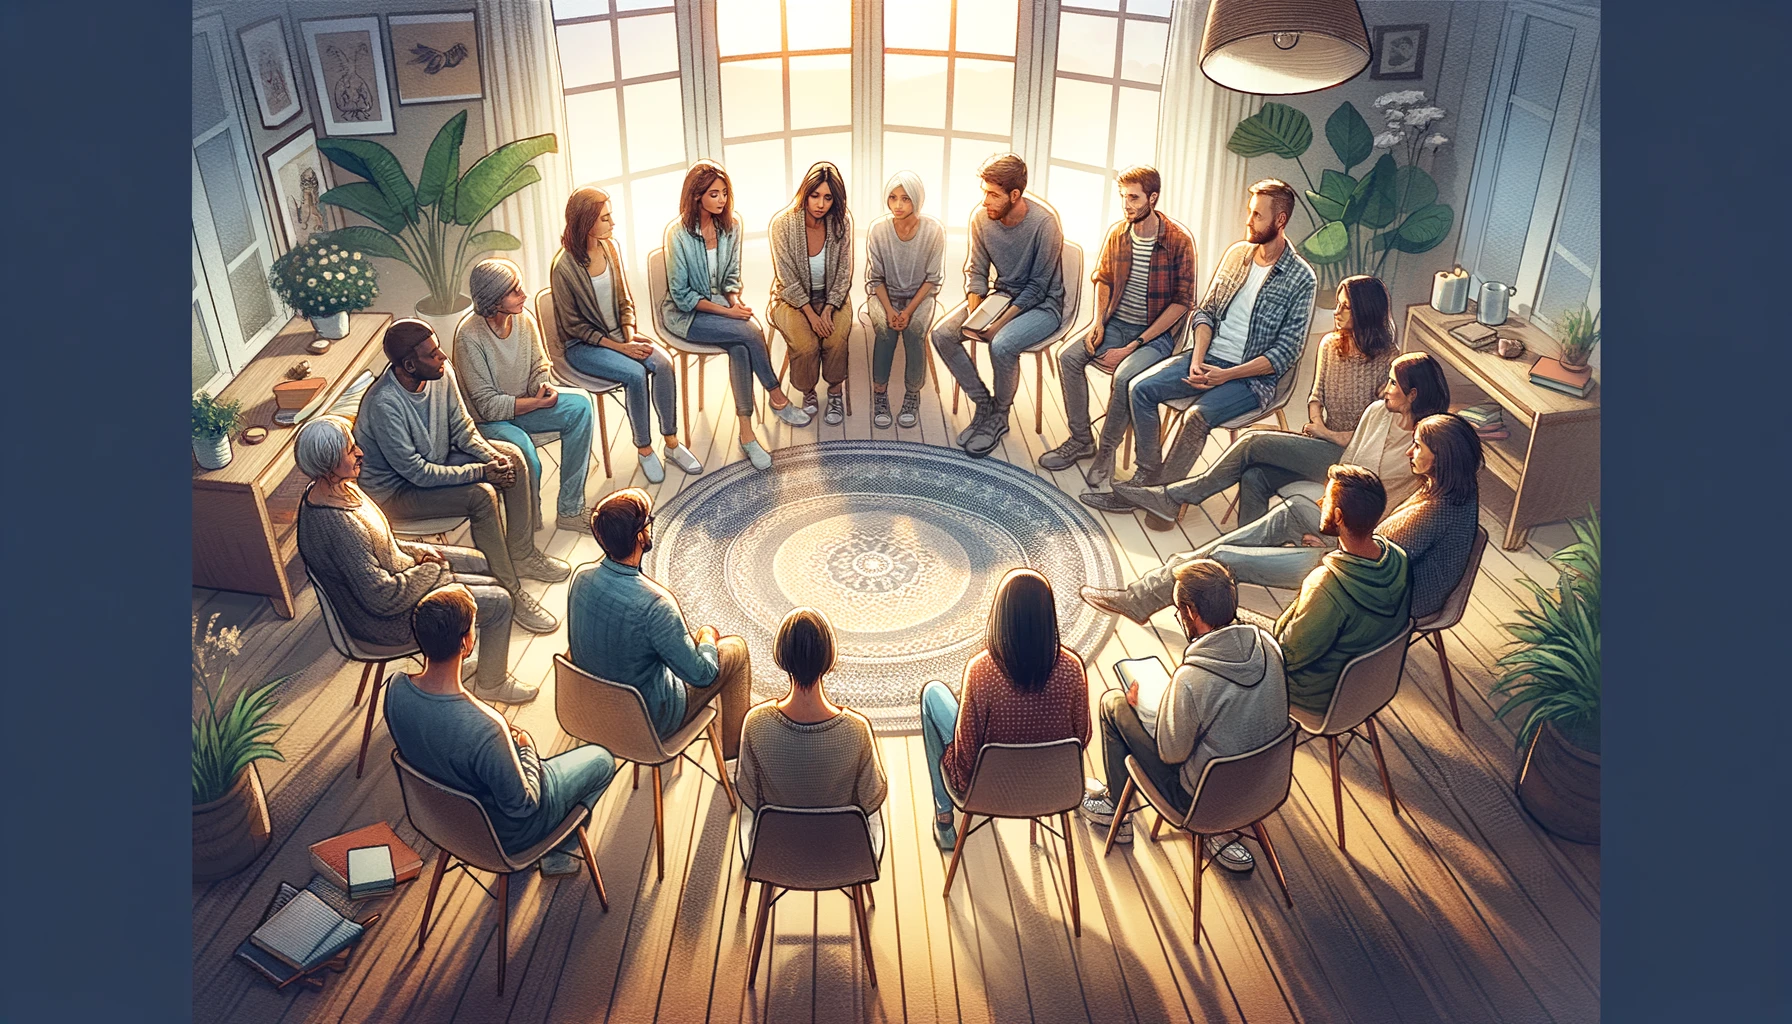 Create an image that captures the essence of connection and shared experiences in recovery. The scene shows a diverse group of people sitting in a cir